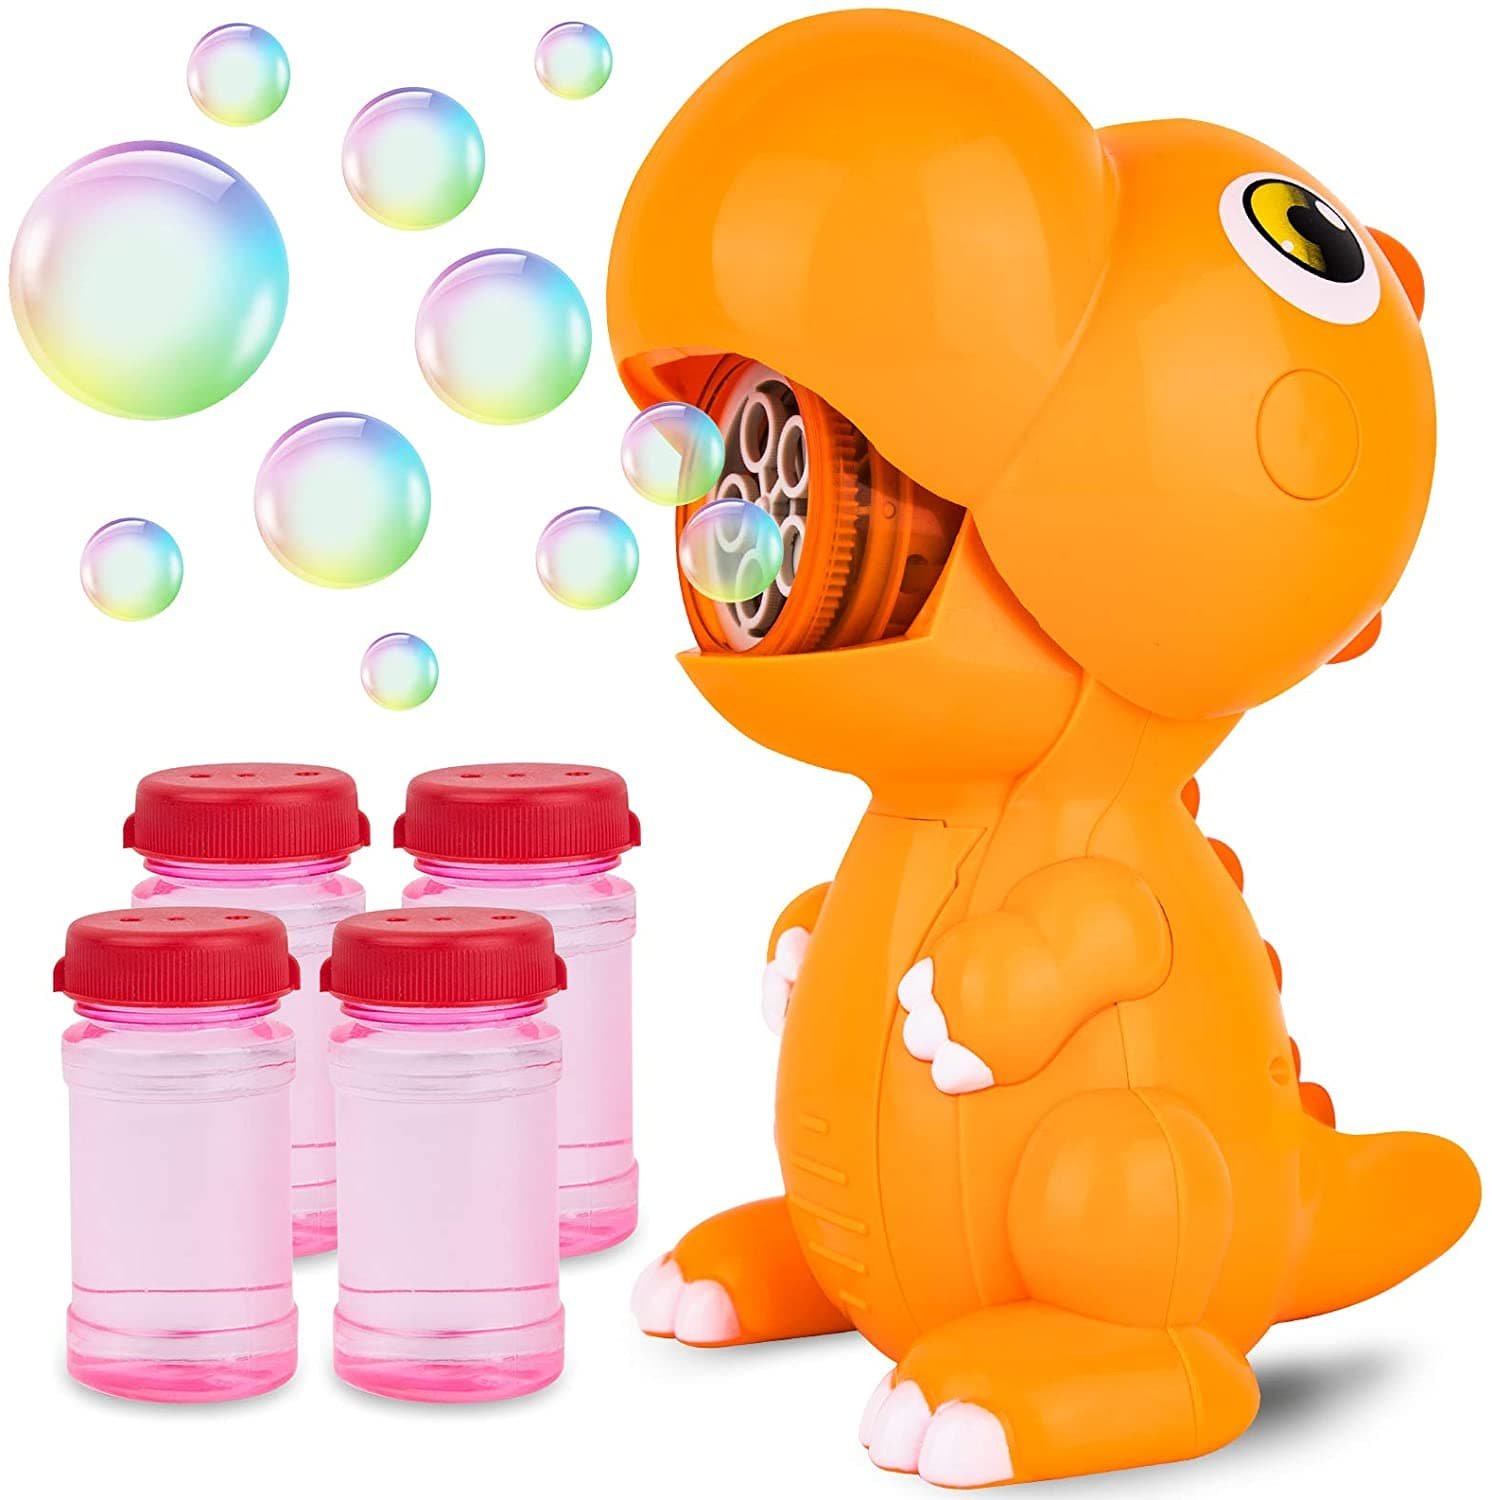 Bubbles Per Minute Bubbles for Toddlers Boys Girls Bubble Maker Toy with Bubble Solutions for Indoor Outdoor Birthday Wedding Party wellvo Bubble Machine for Kids Automatic Bubble Blower 3000 